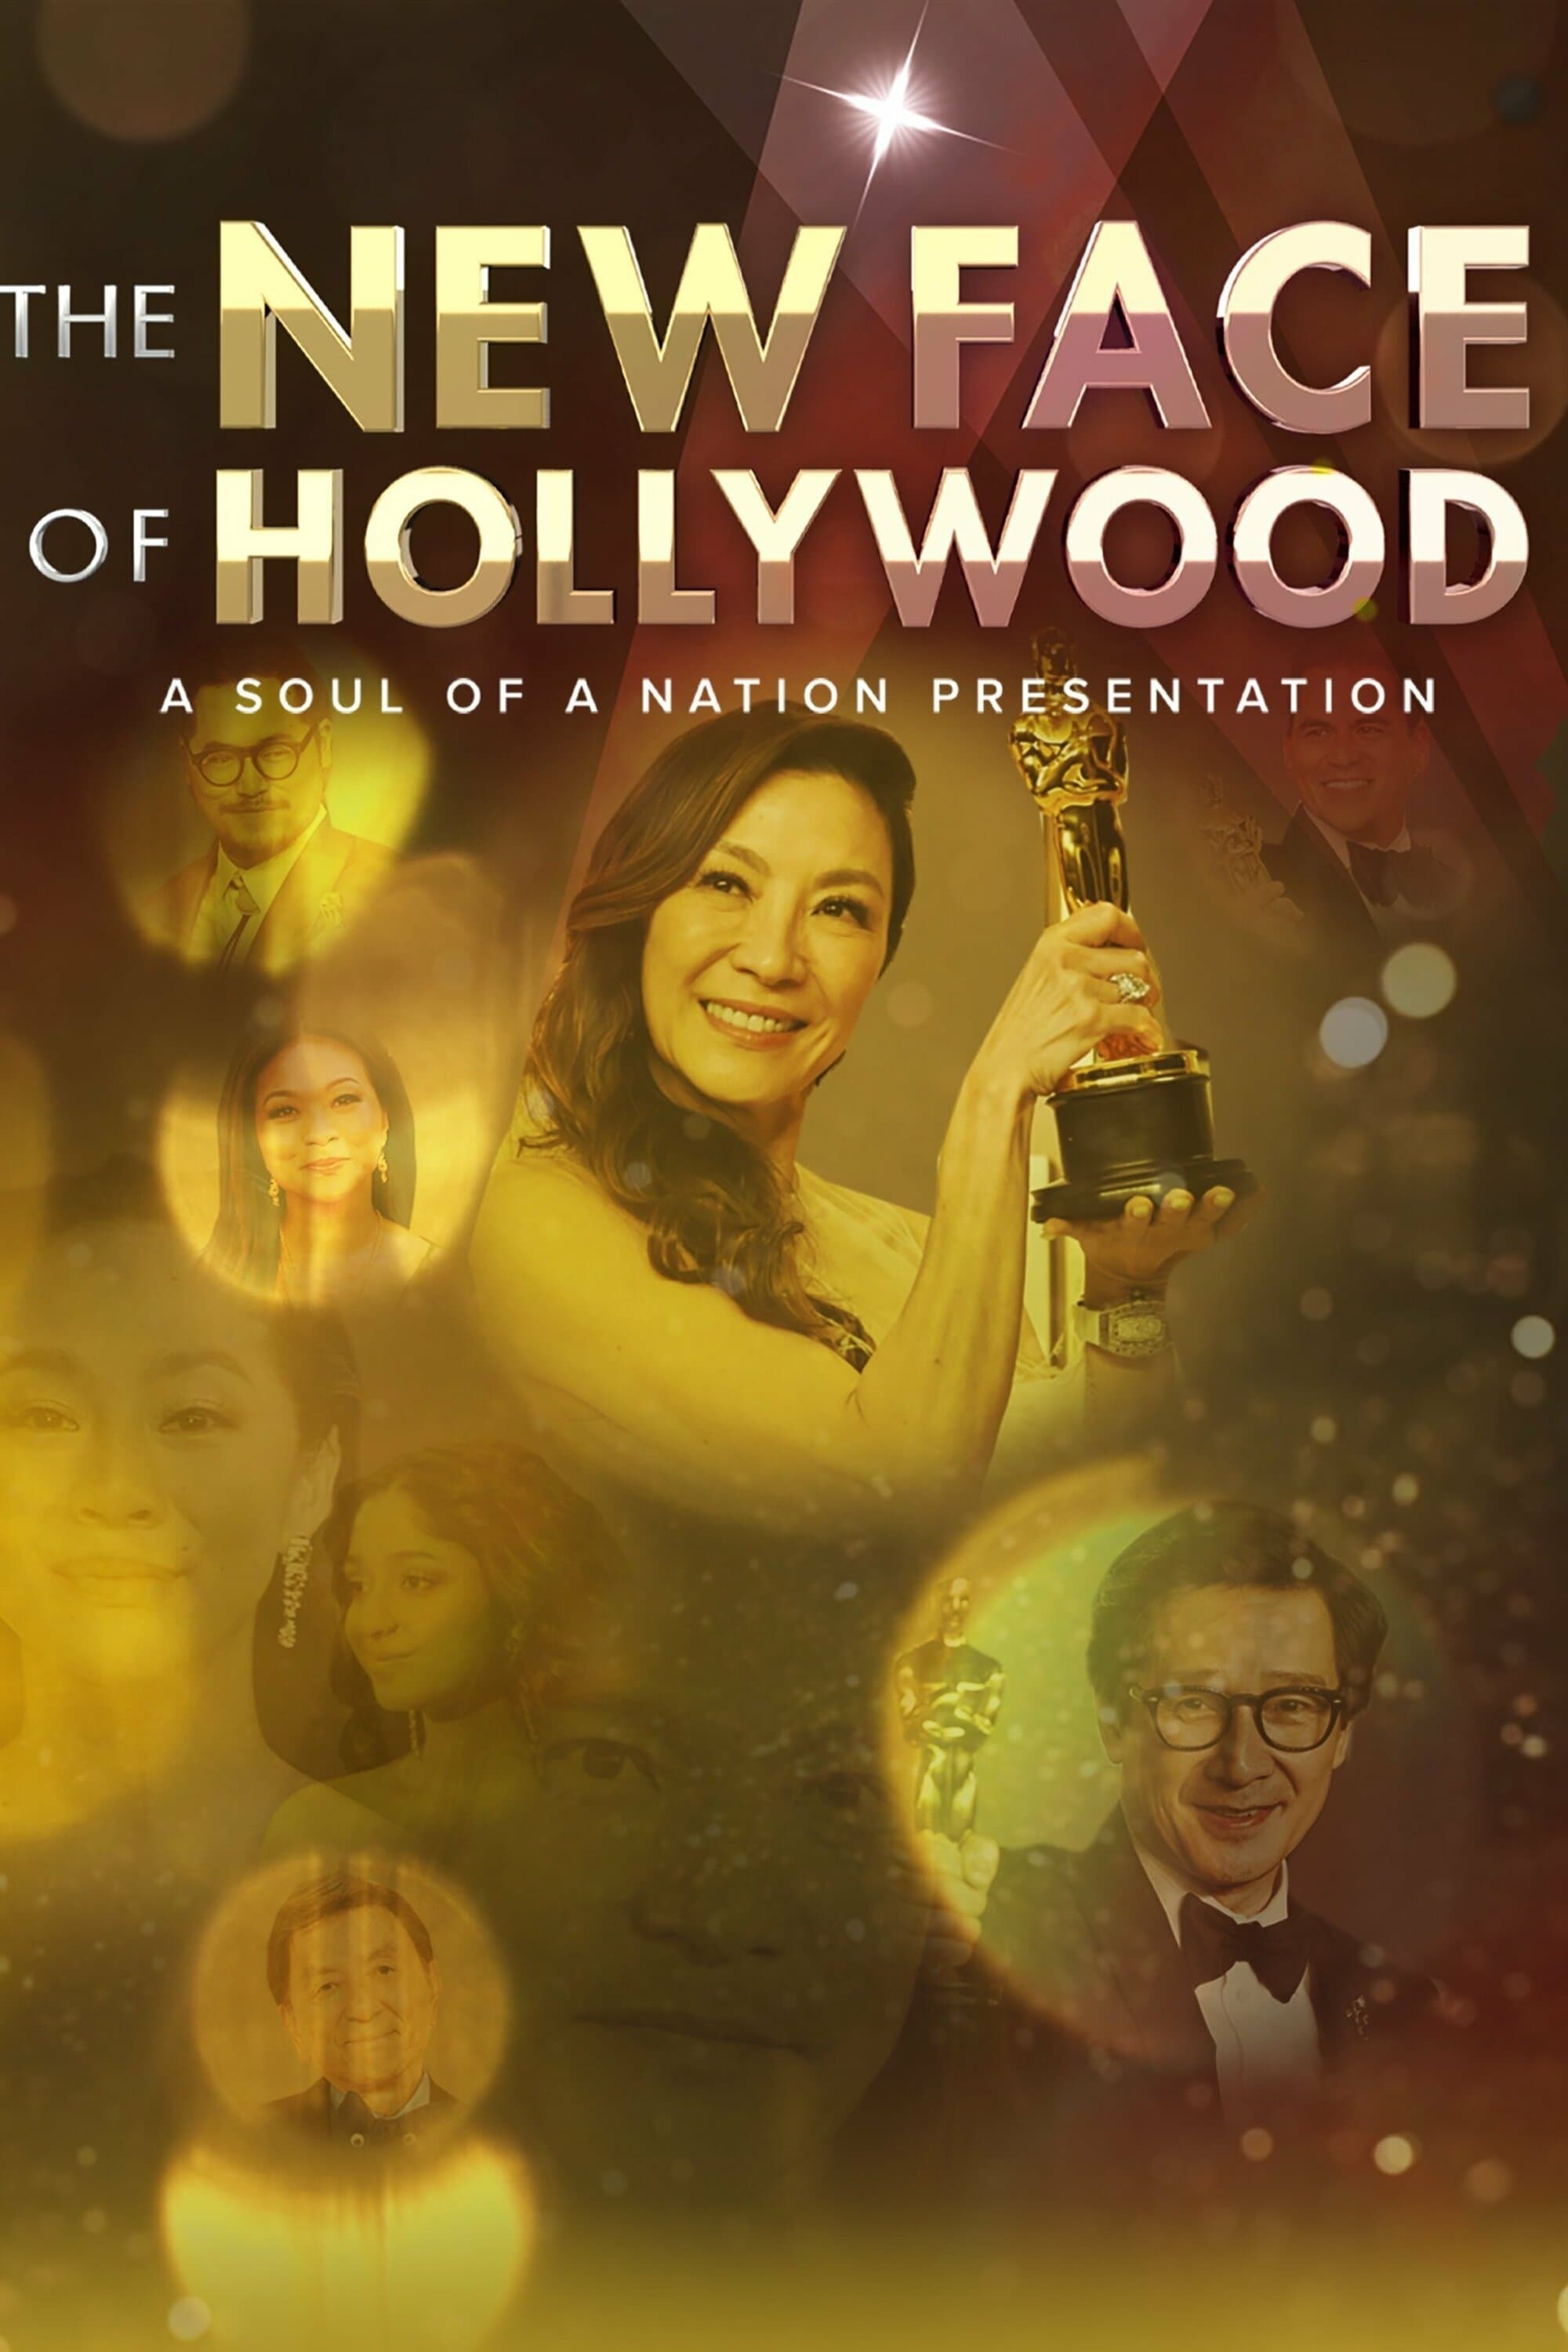 The New Face of Hollywood – A Soul of a Nation Presentation film